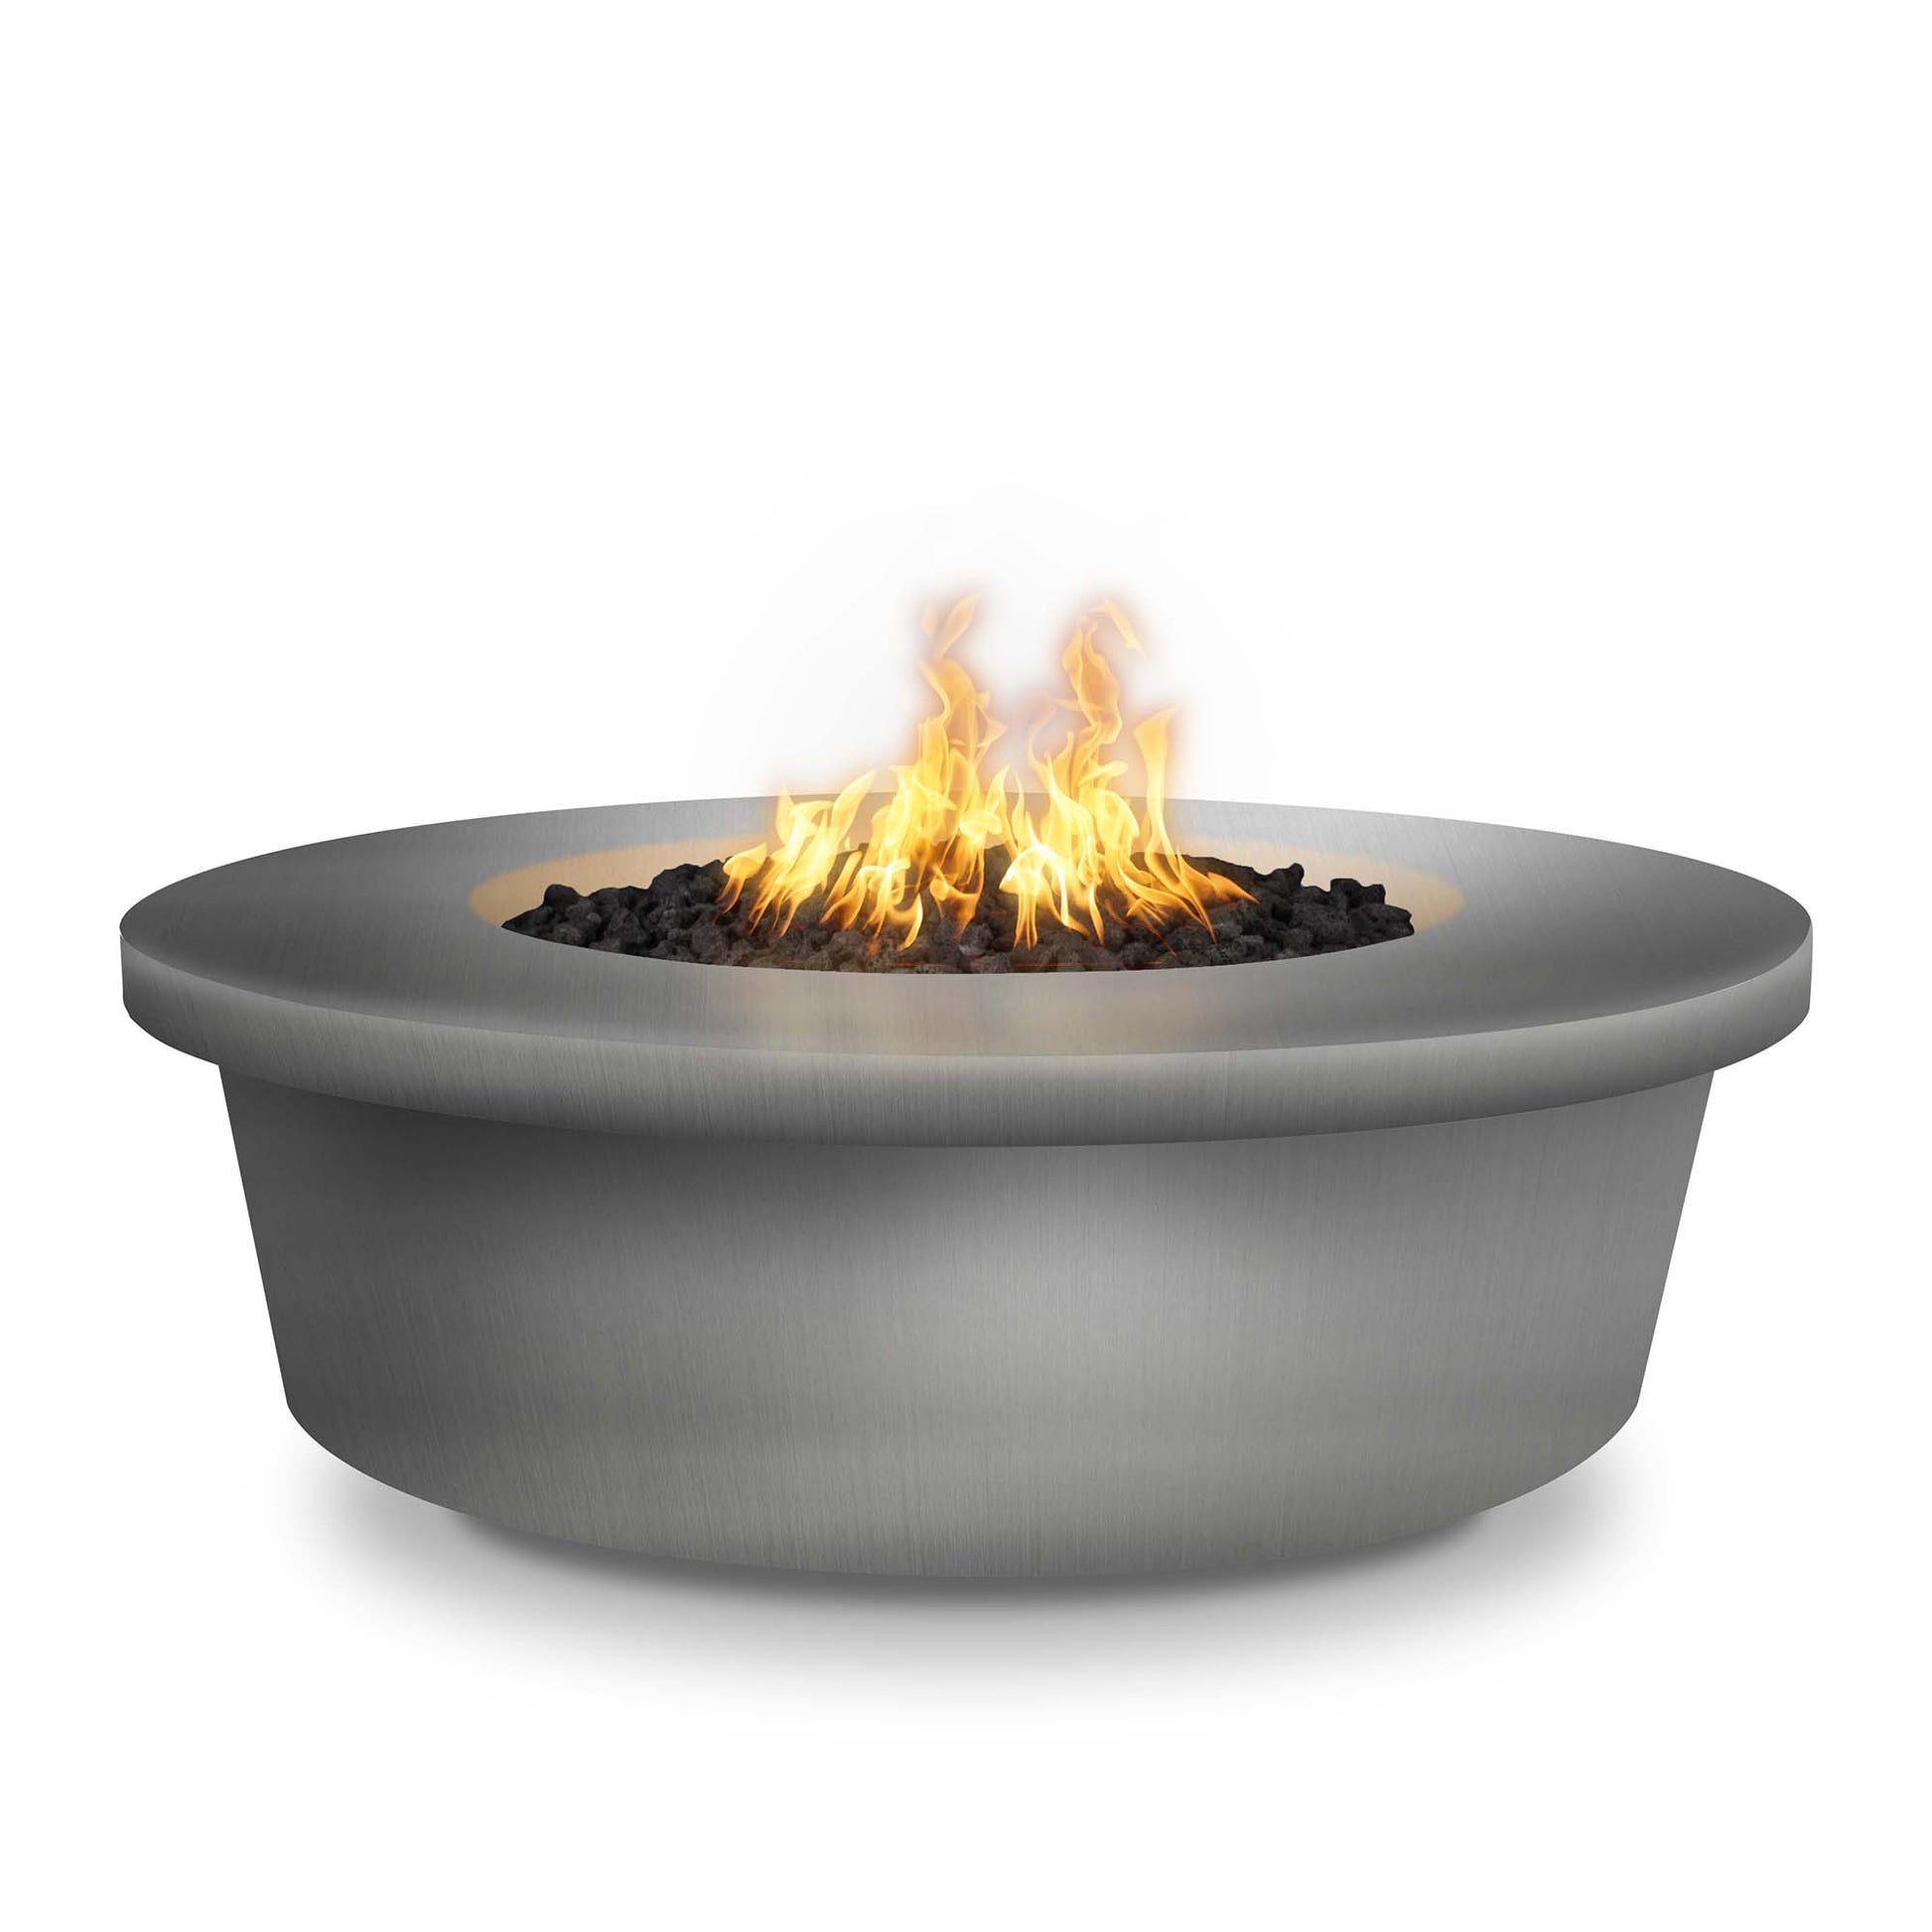 The Outdoor Plus Round Tempe 48" Stainless Steel Natural Gas Fire Pit with 110V Electronic Ignition